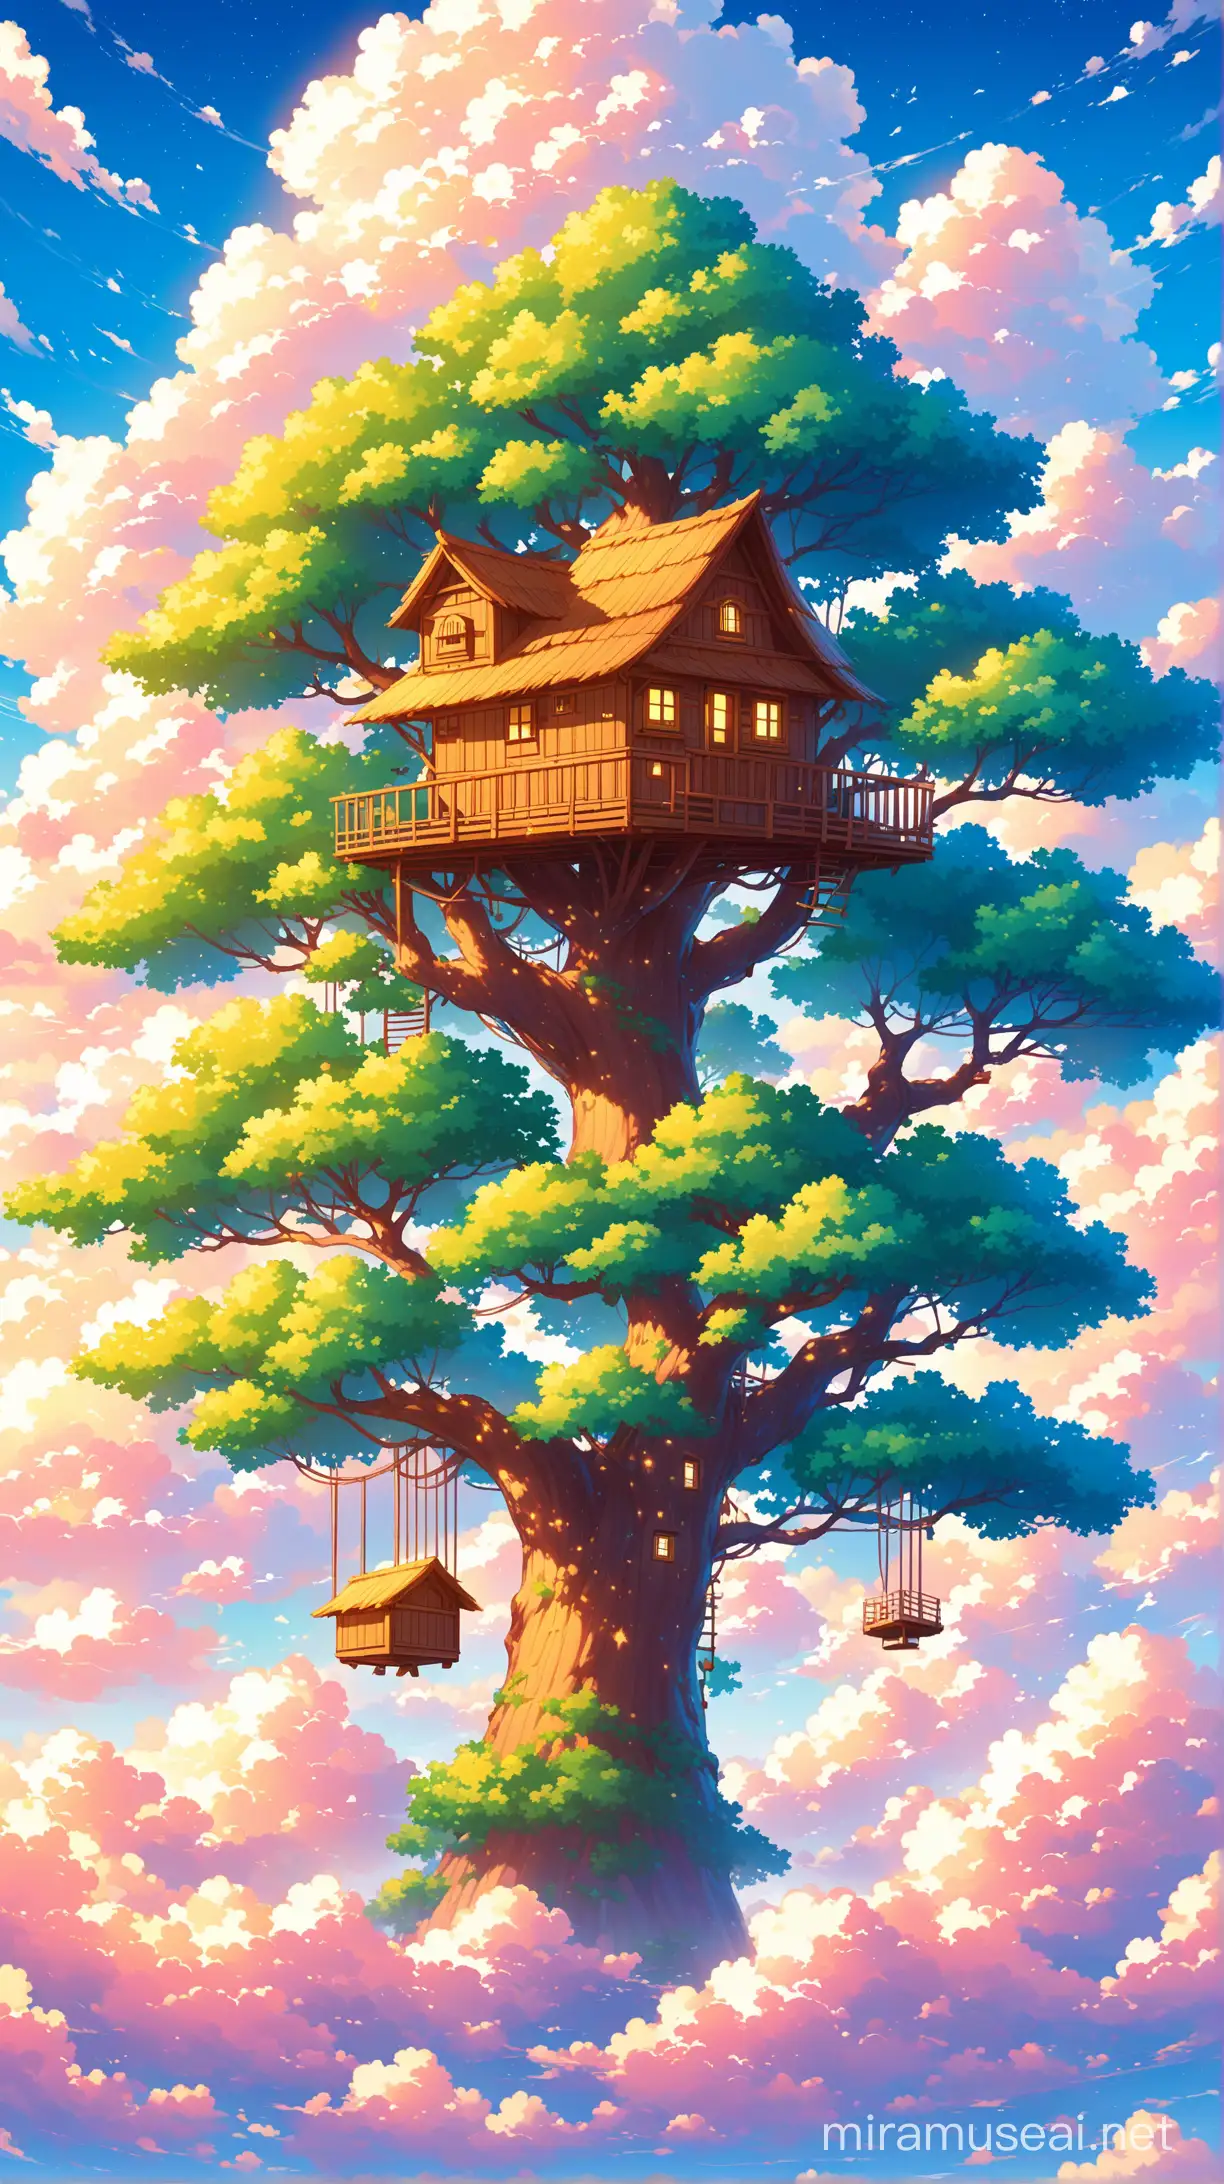 Dreamy Tree House in the Sky with Pretty Clouds